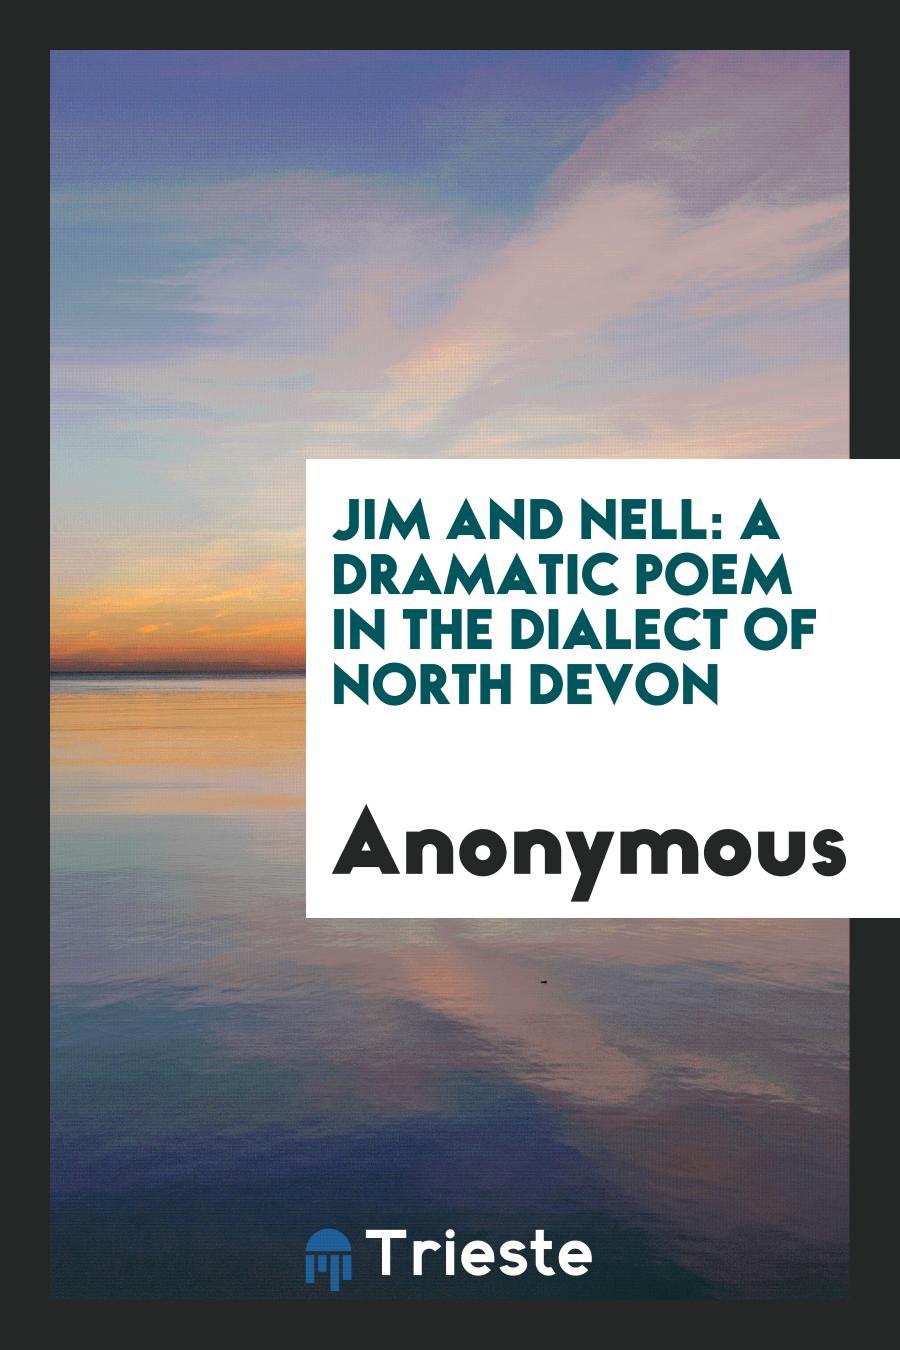 Jim and Nell: a dramatic poem in the dialect of north Devon